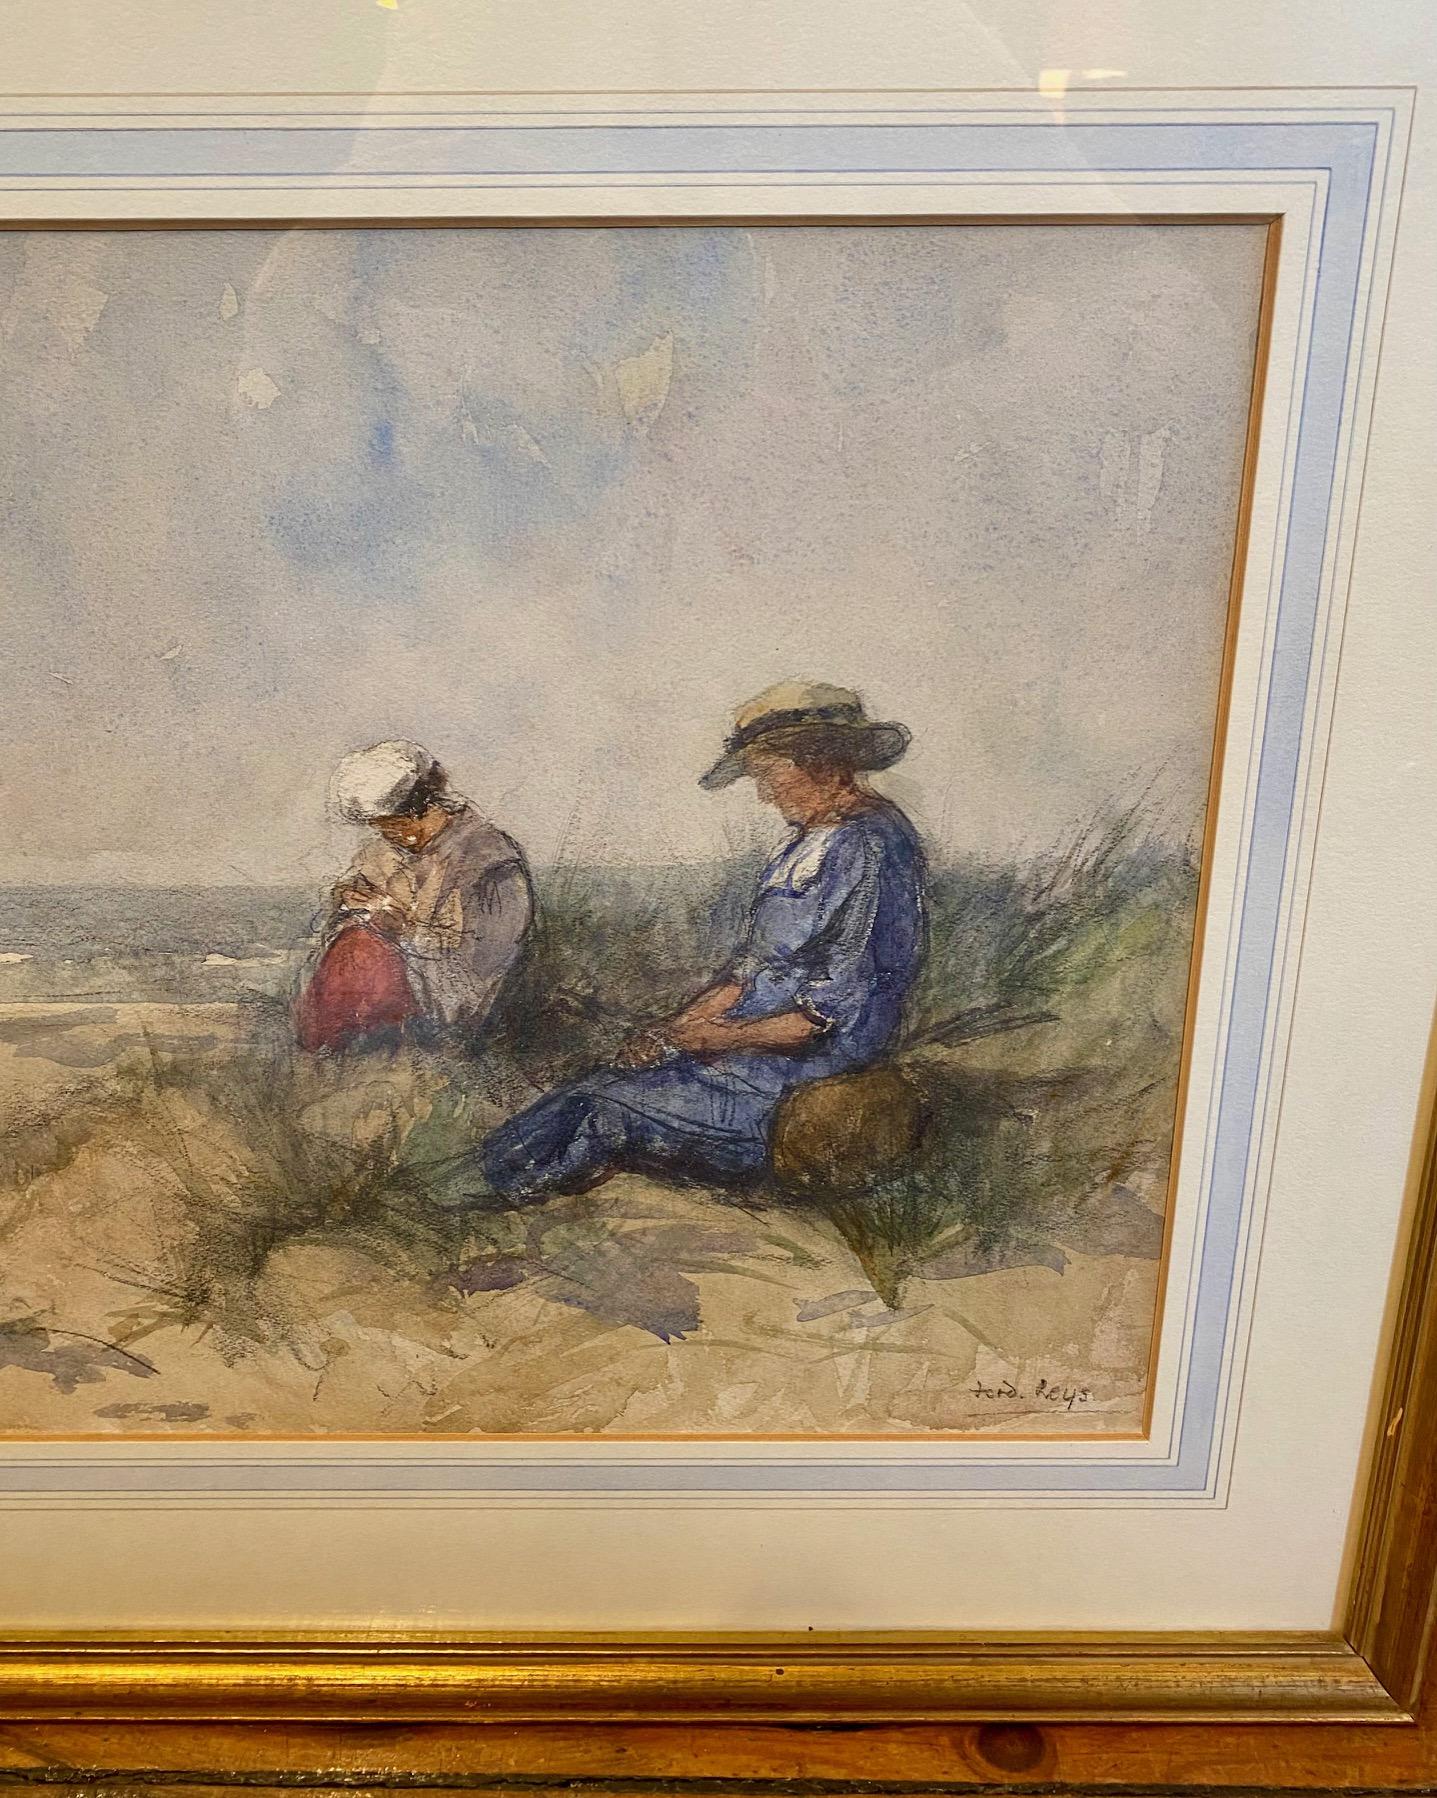 Impressionist Watercolor Shore Scene by Ferdinand Leys (Belgian: 1873 -1960), circa 1920, a hand painted original watercolor on paper impressionist view of two female figures seated in a sand dune, with calm ocean stretching out in the background,